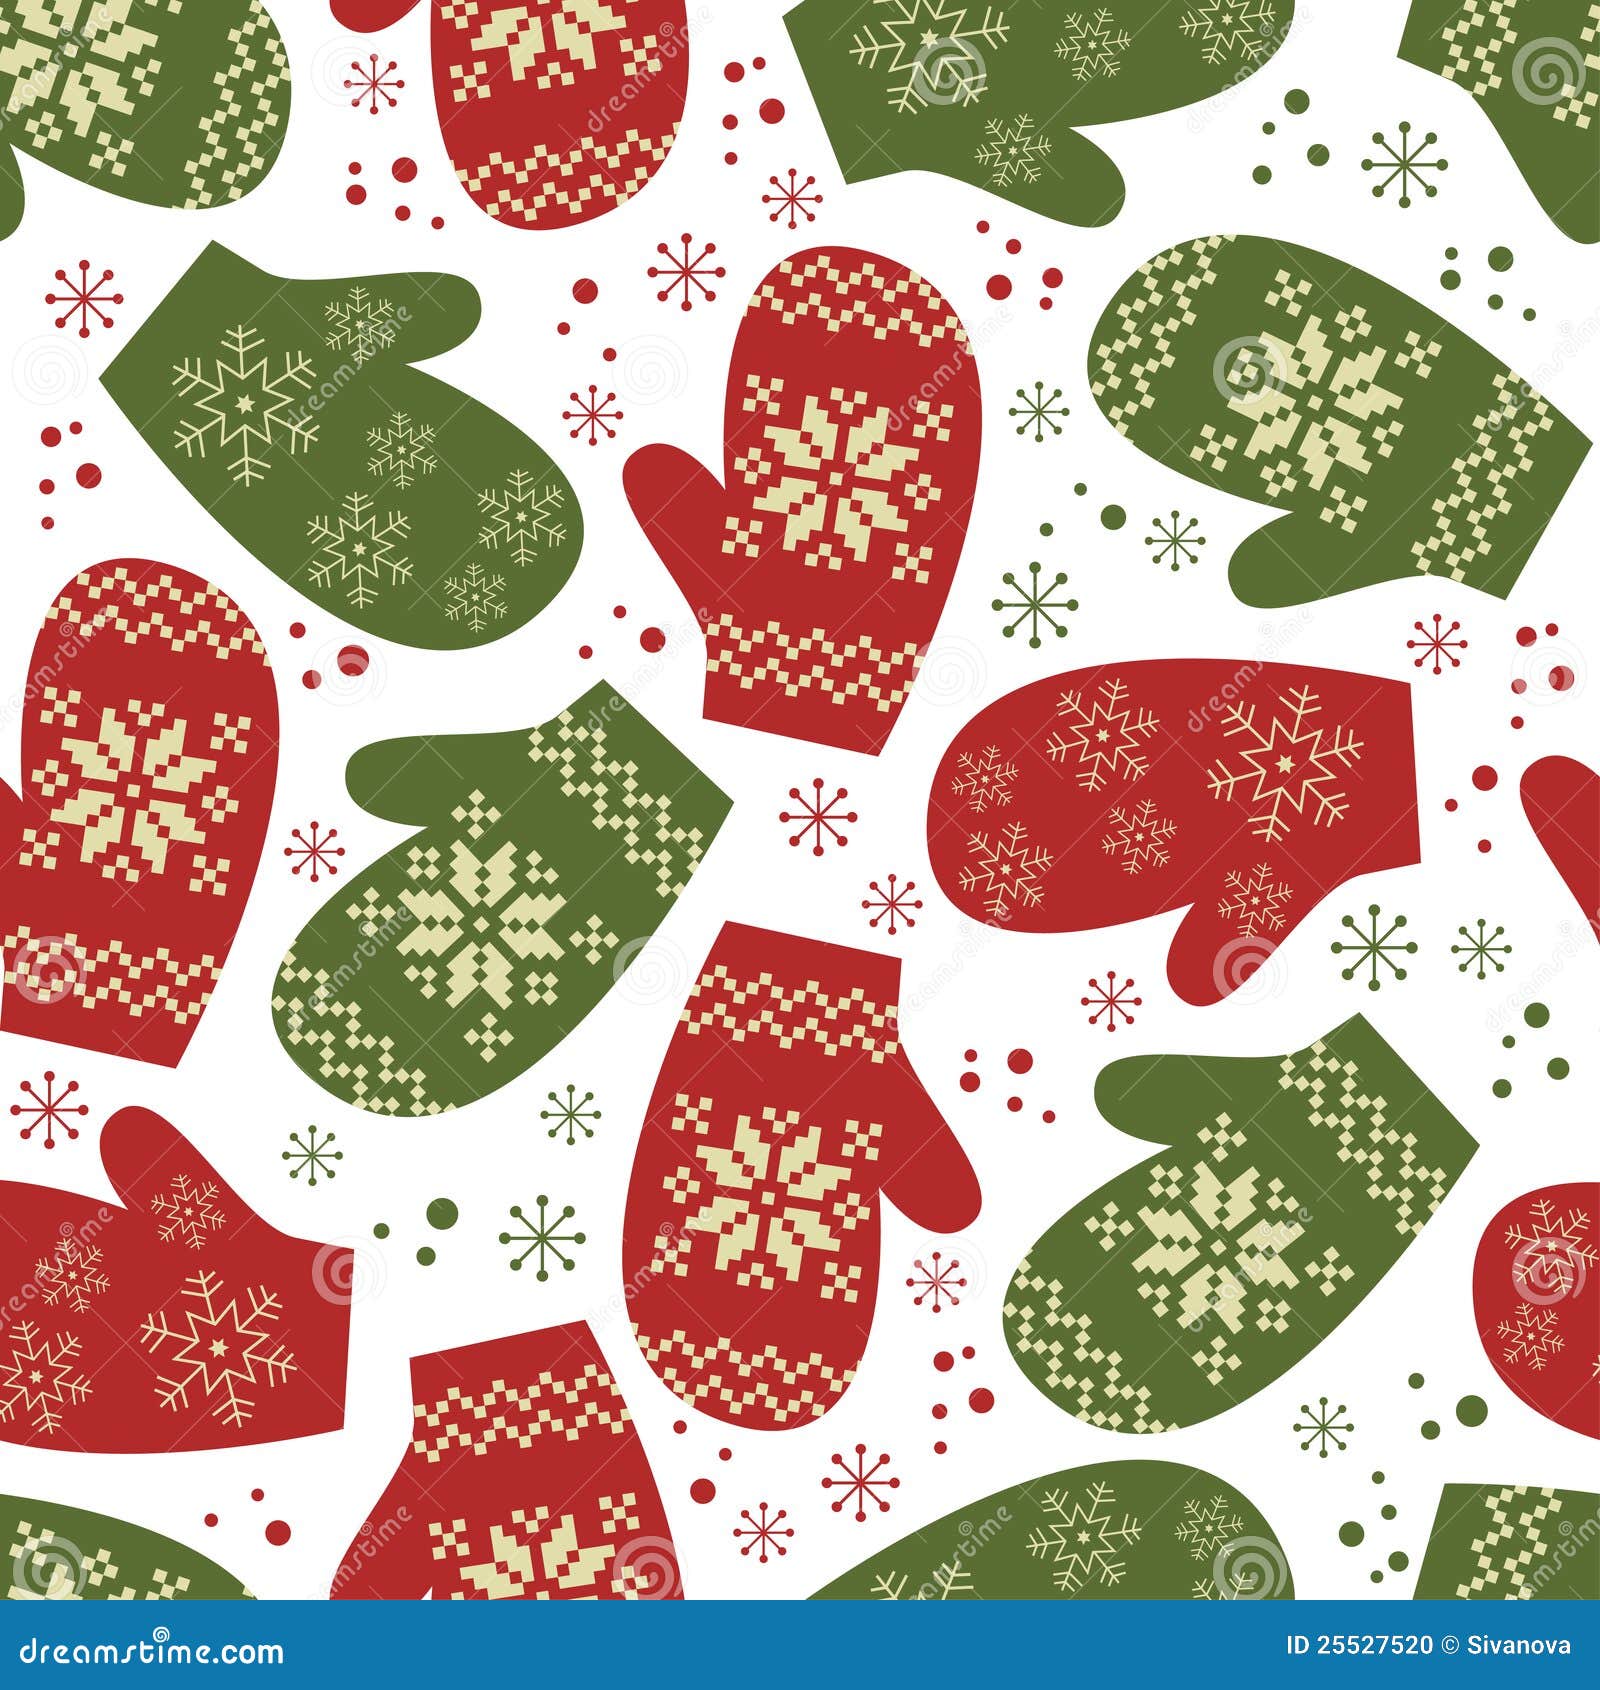 christmas patterns clipart - photo #3